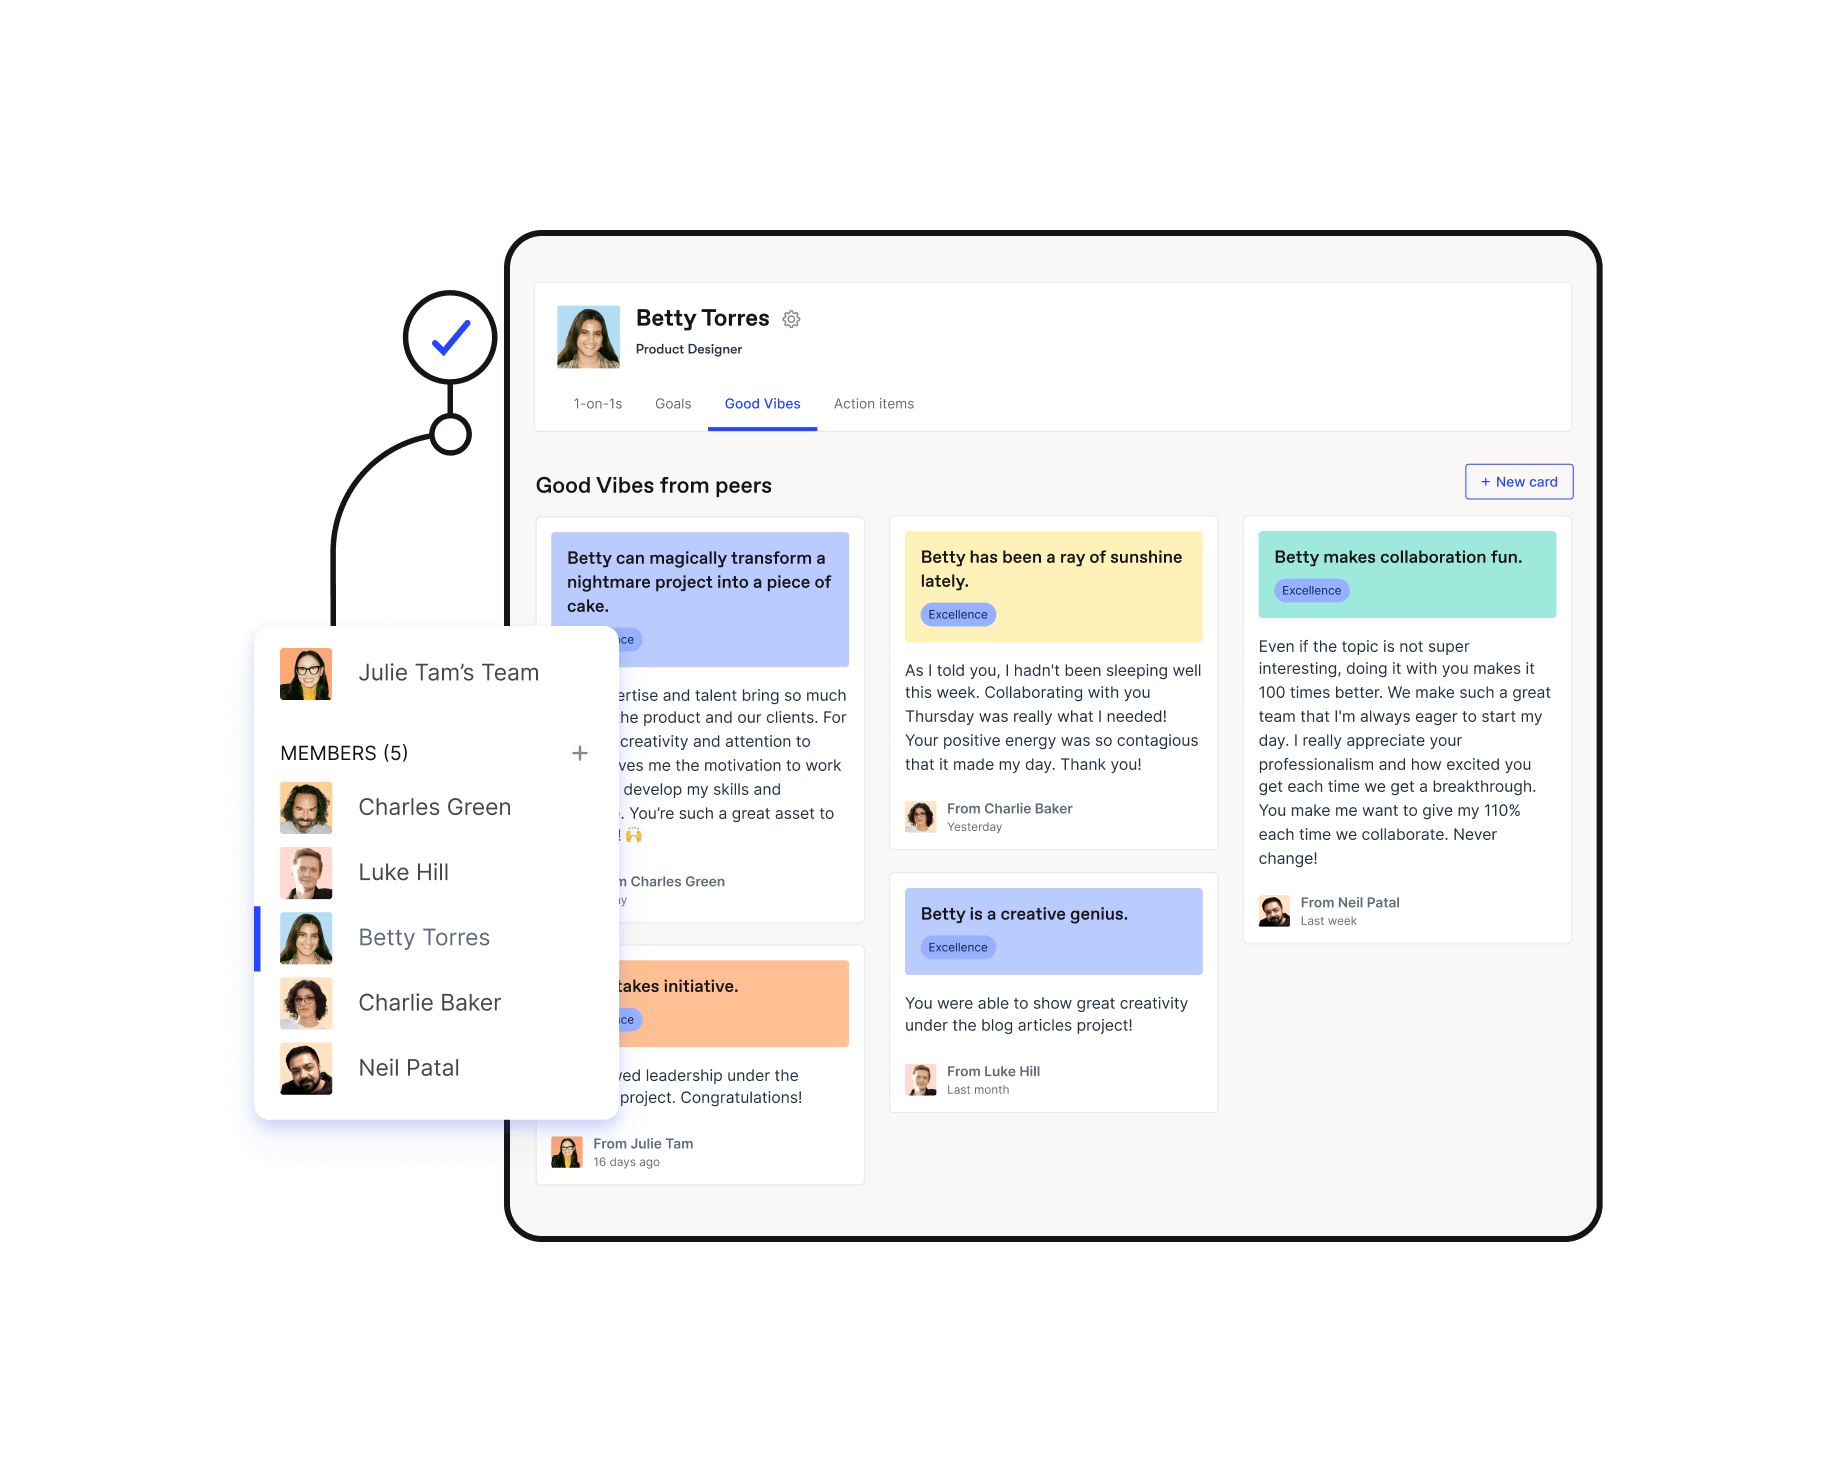 Employee profile in Officevibe showcasing the user’s team members and the Good Vibes cards they have received from peers.